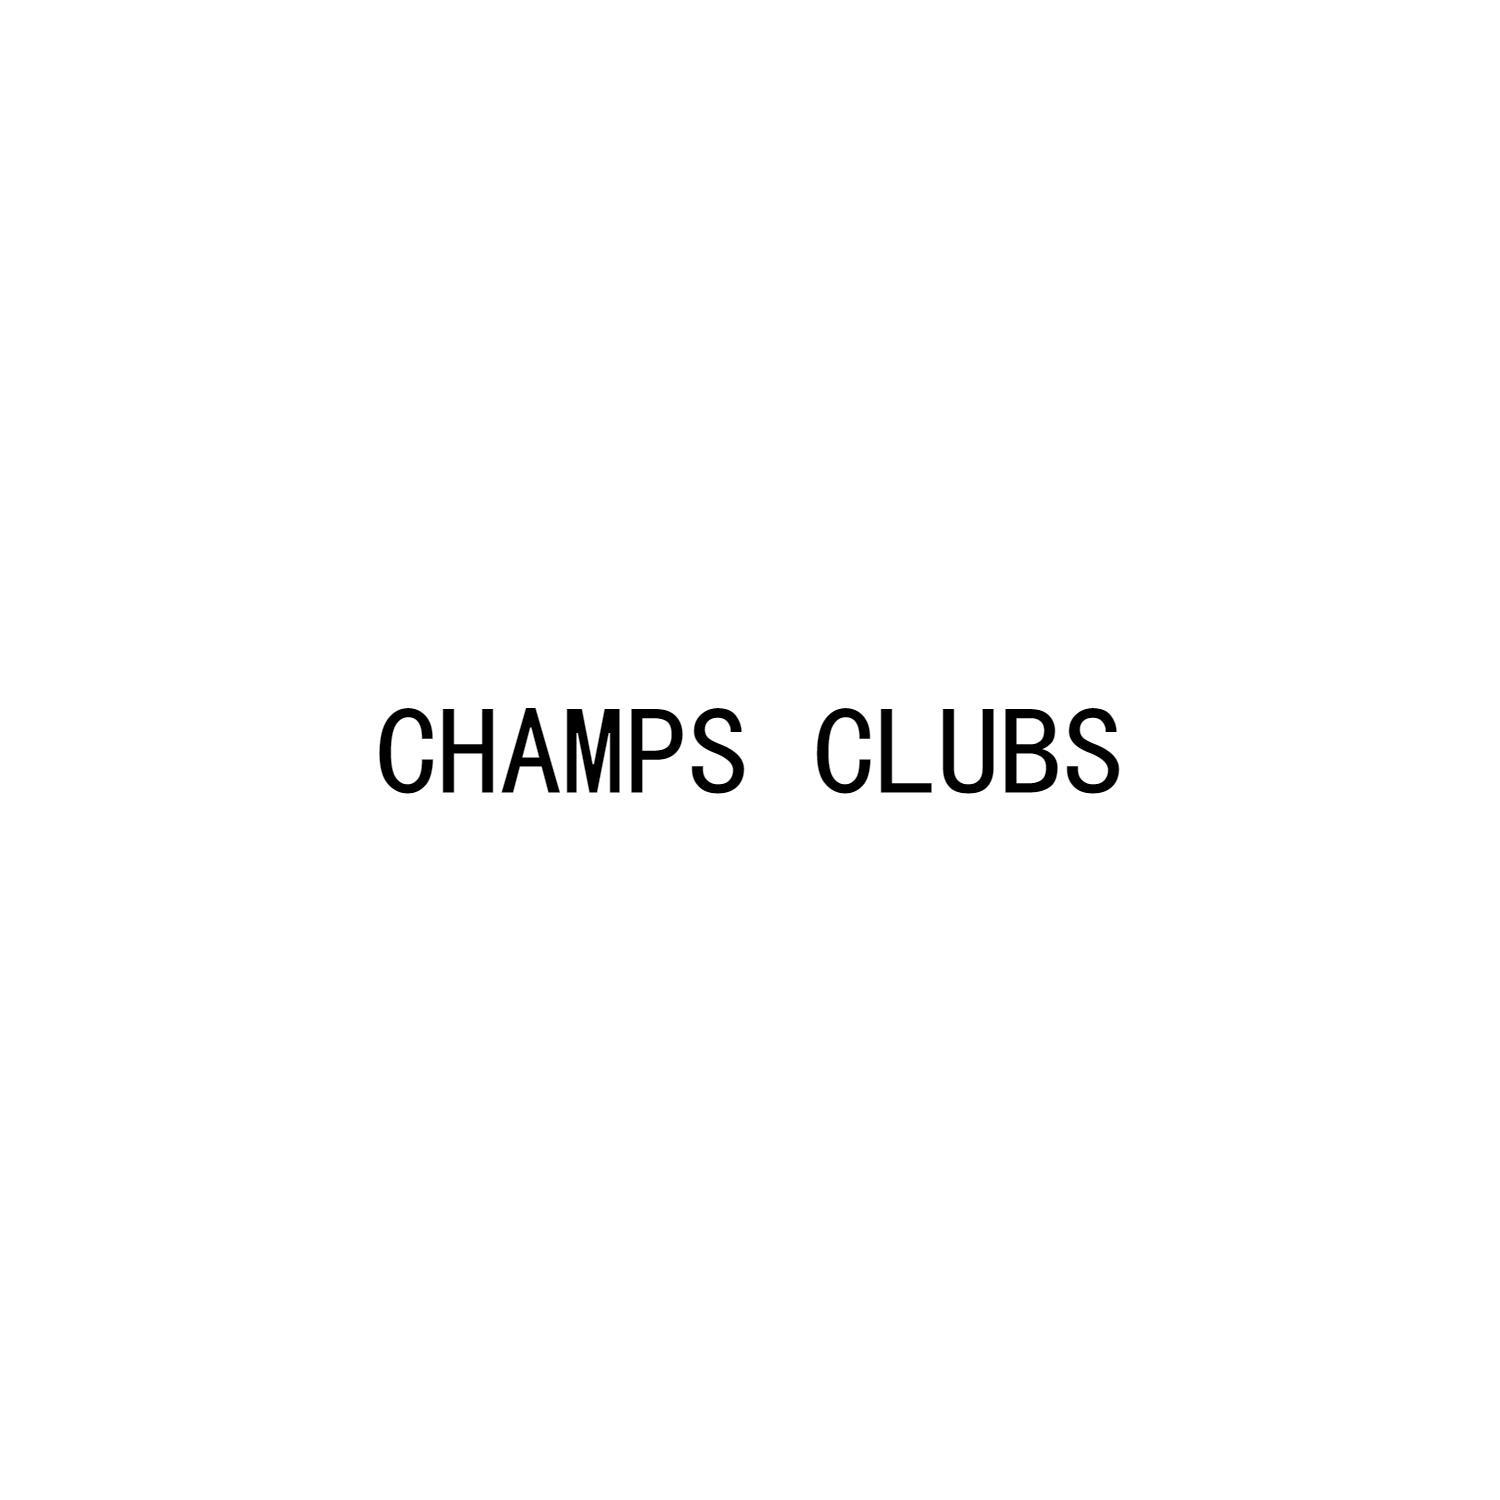 CHAMPS CLUBS